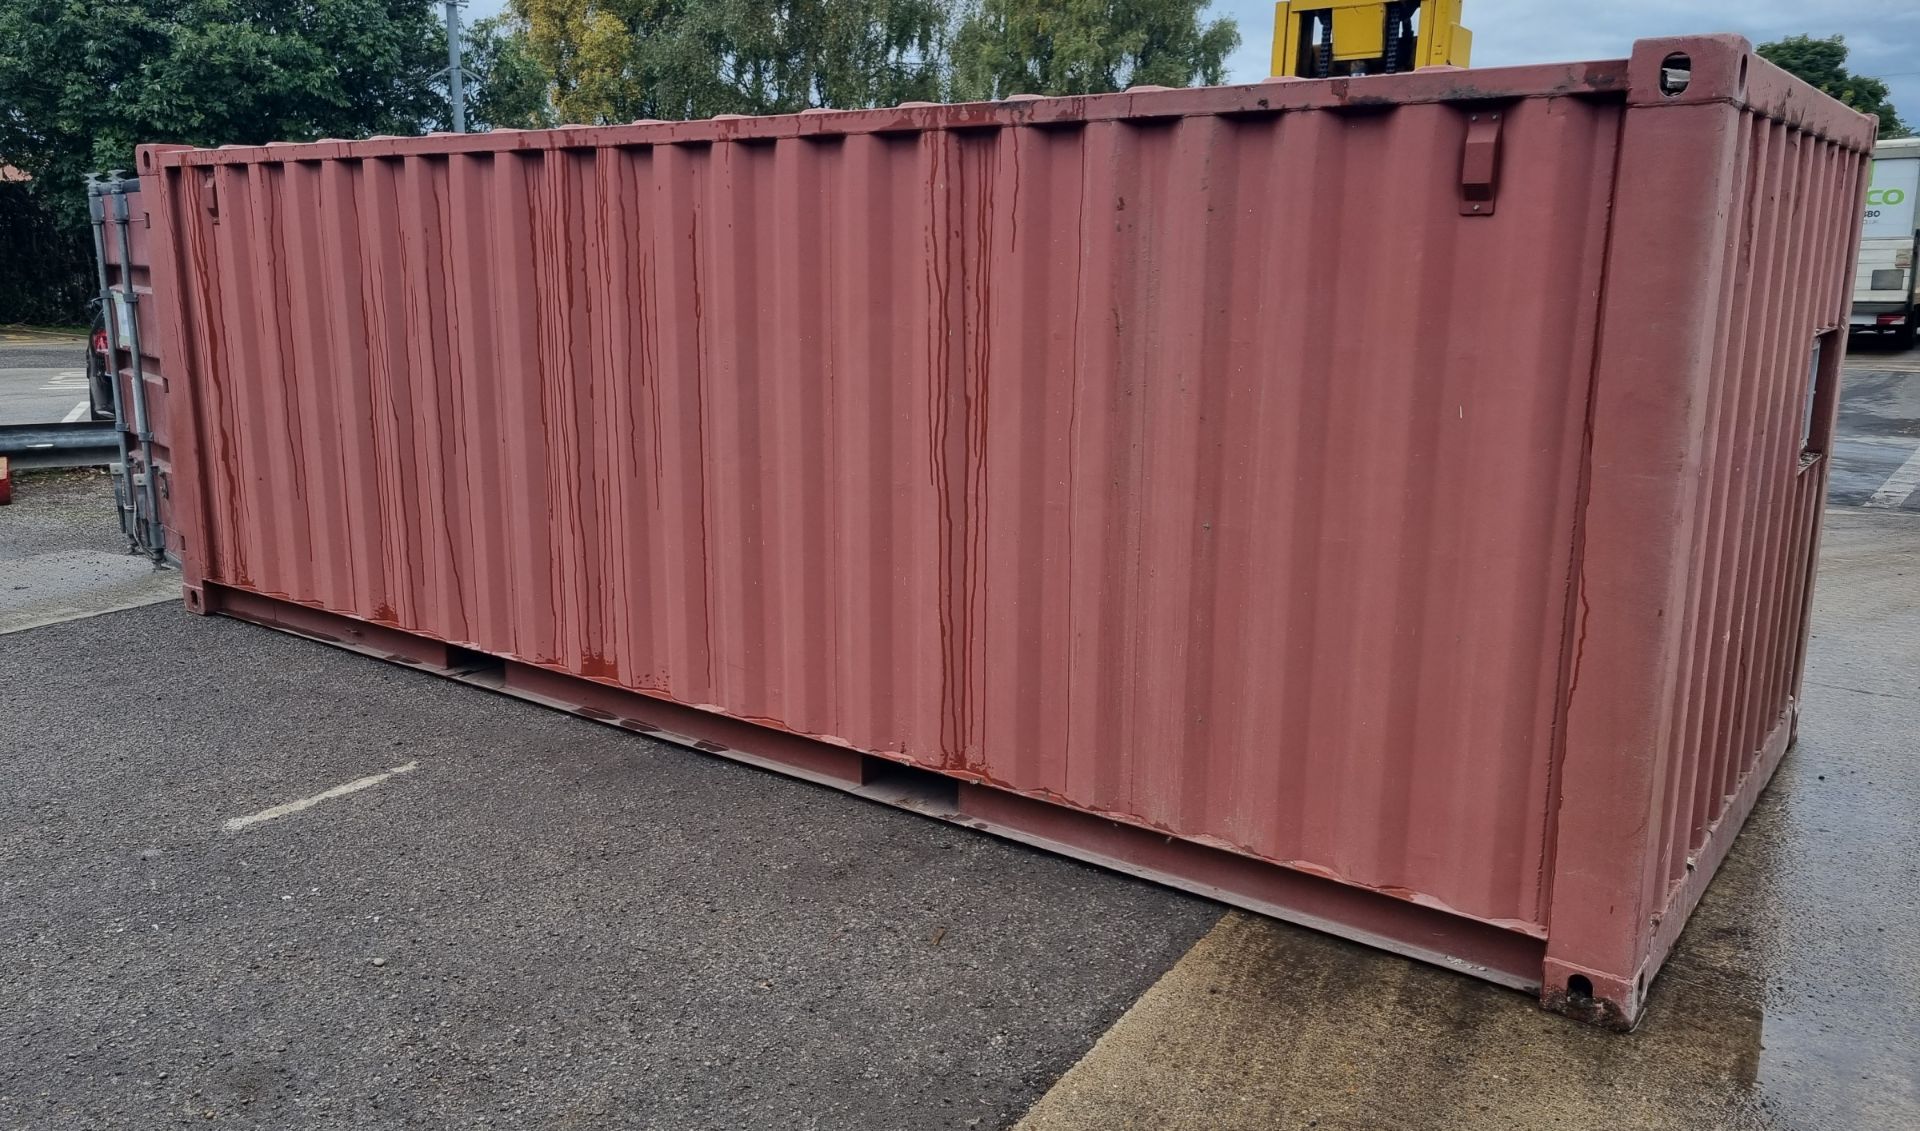 Stonehaven Engineering Ltd transportable storage container ISO 499/99/01 - dimensions: 20ft x 8ft x - Bild 3 aus 6